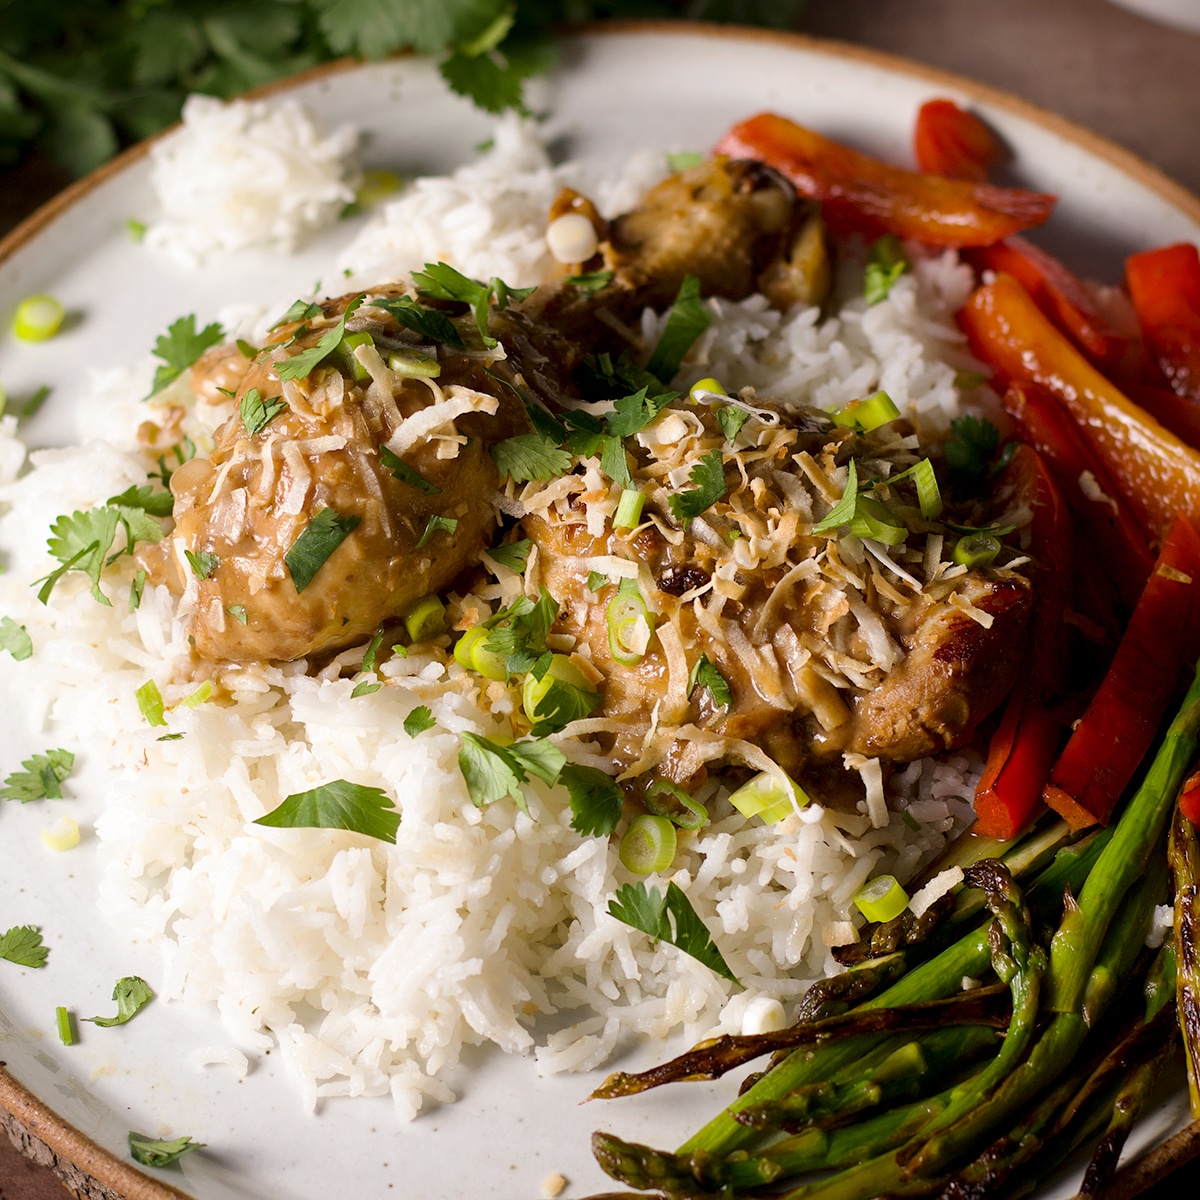 A plate containing Filipino chicken adobo with coconut milk served with sautéed vegetables over rice.